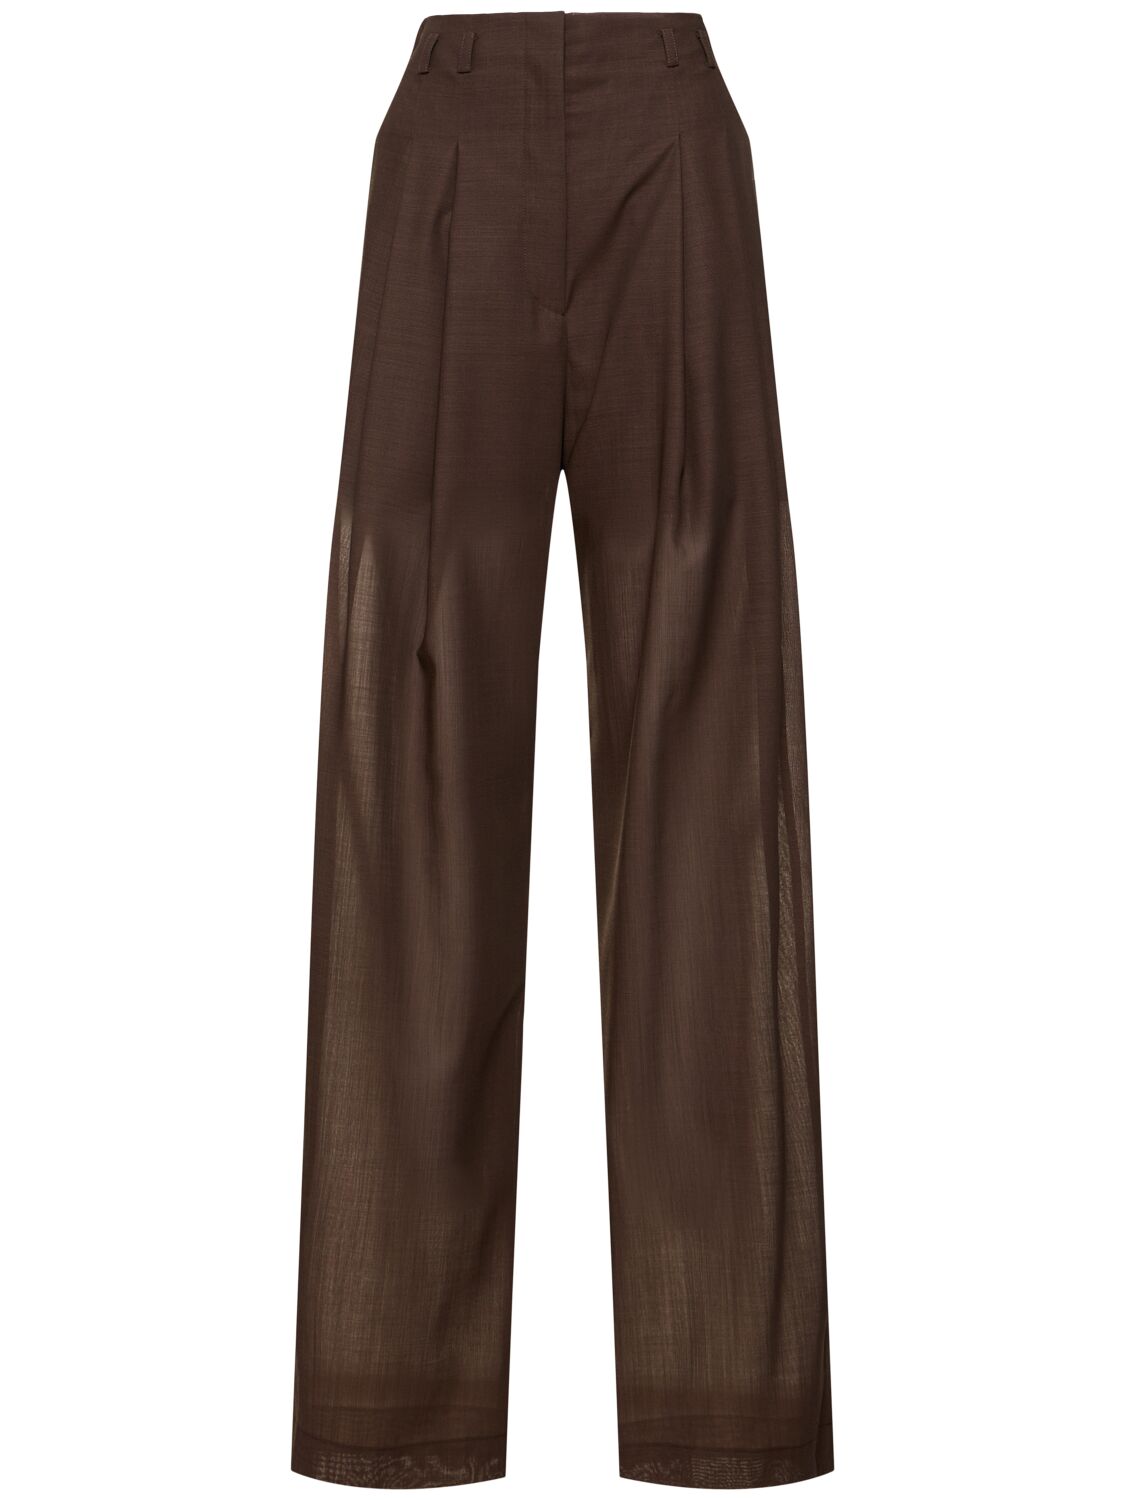 Voile High Rise Pants